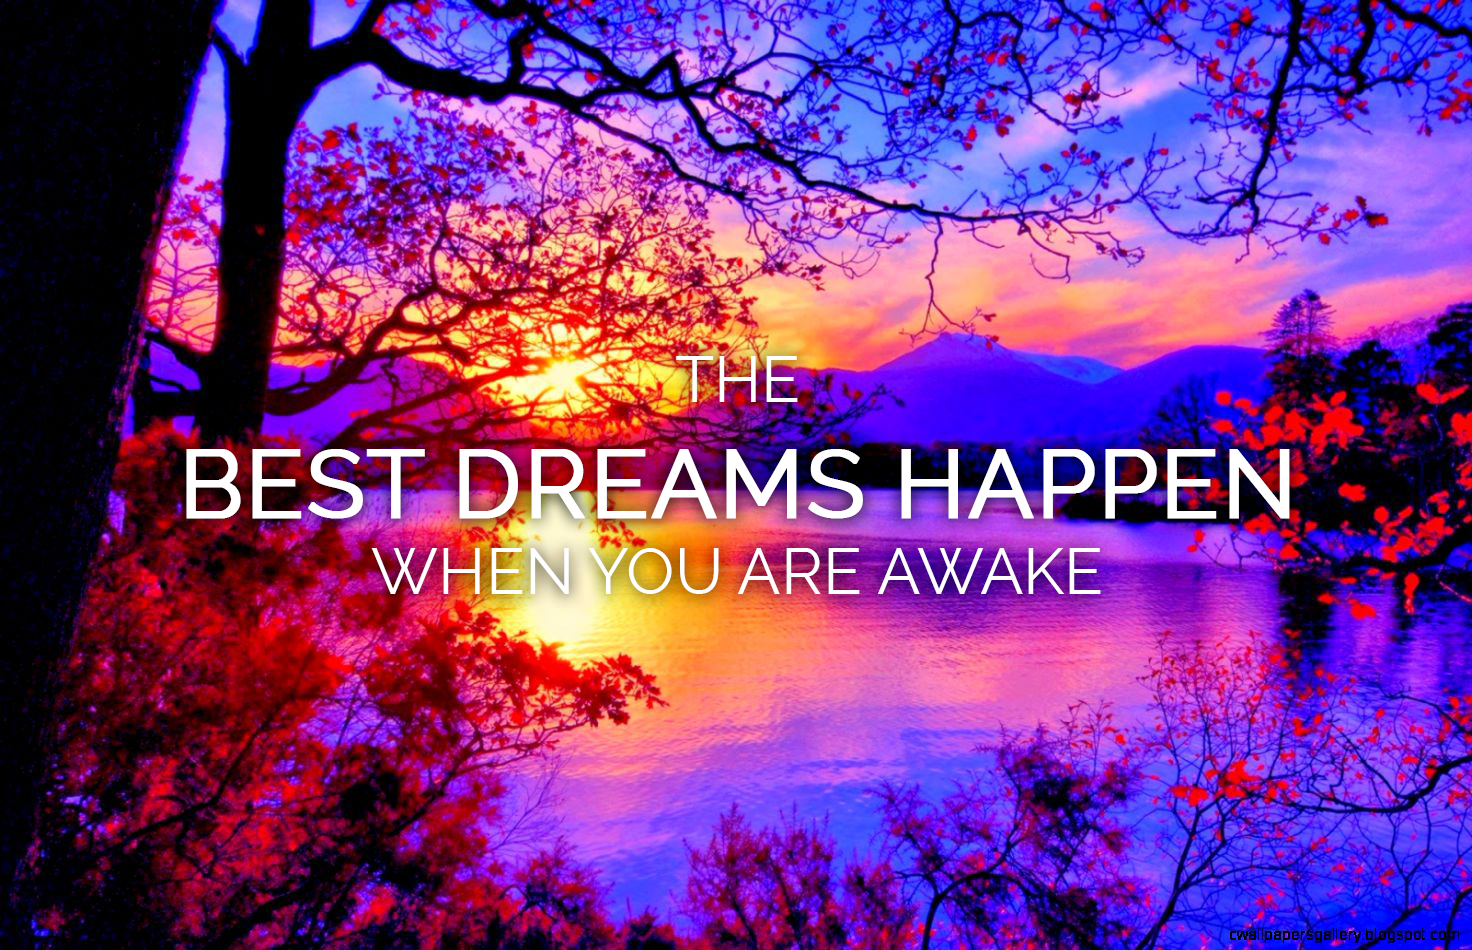 The Best Dreams Happen When You Are Awake